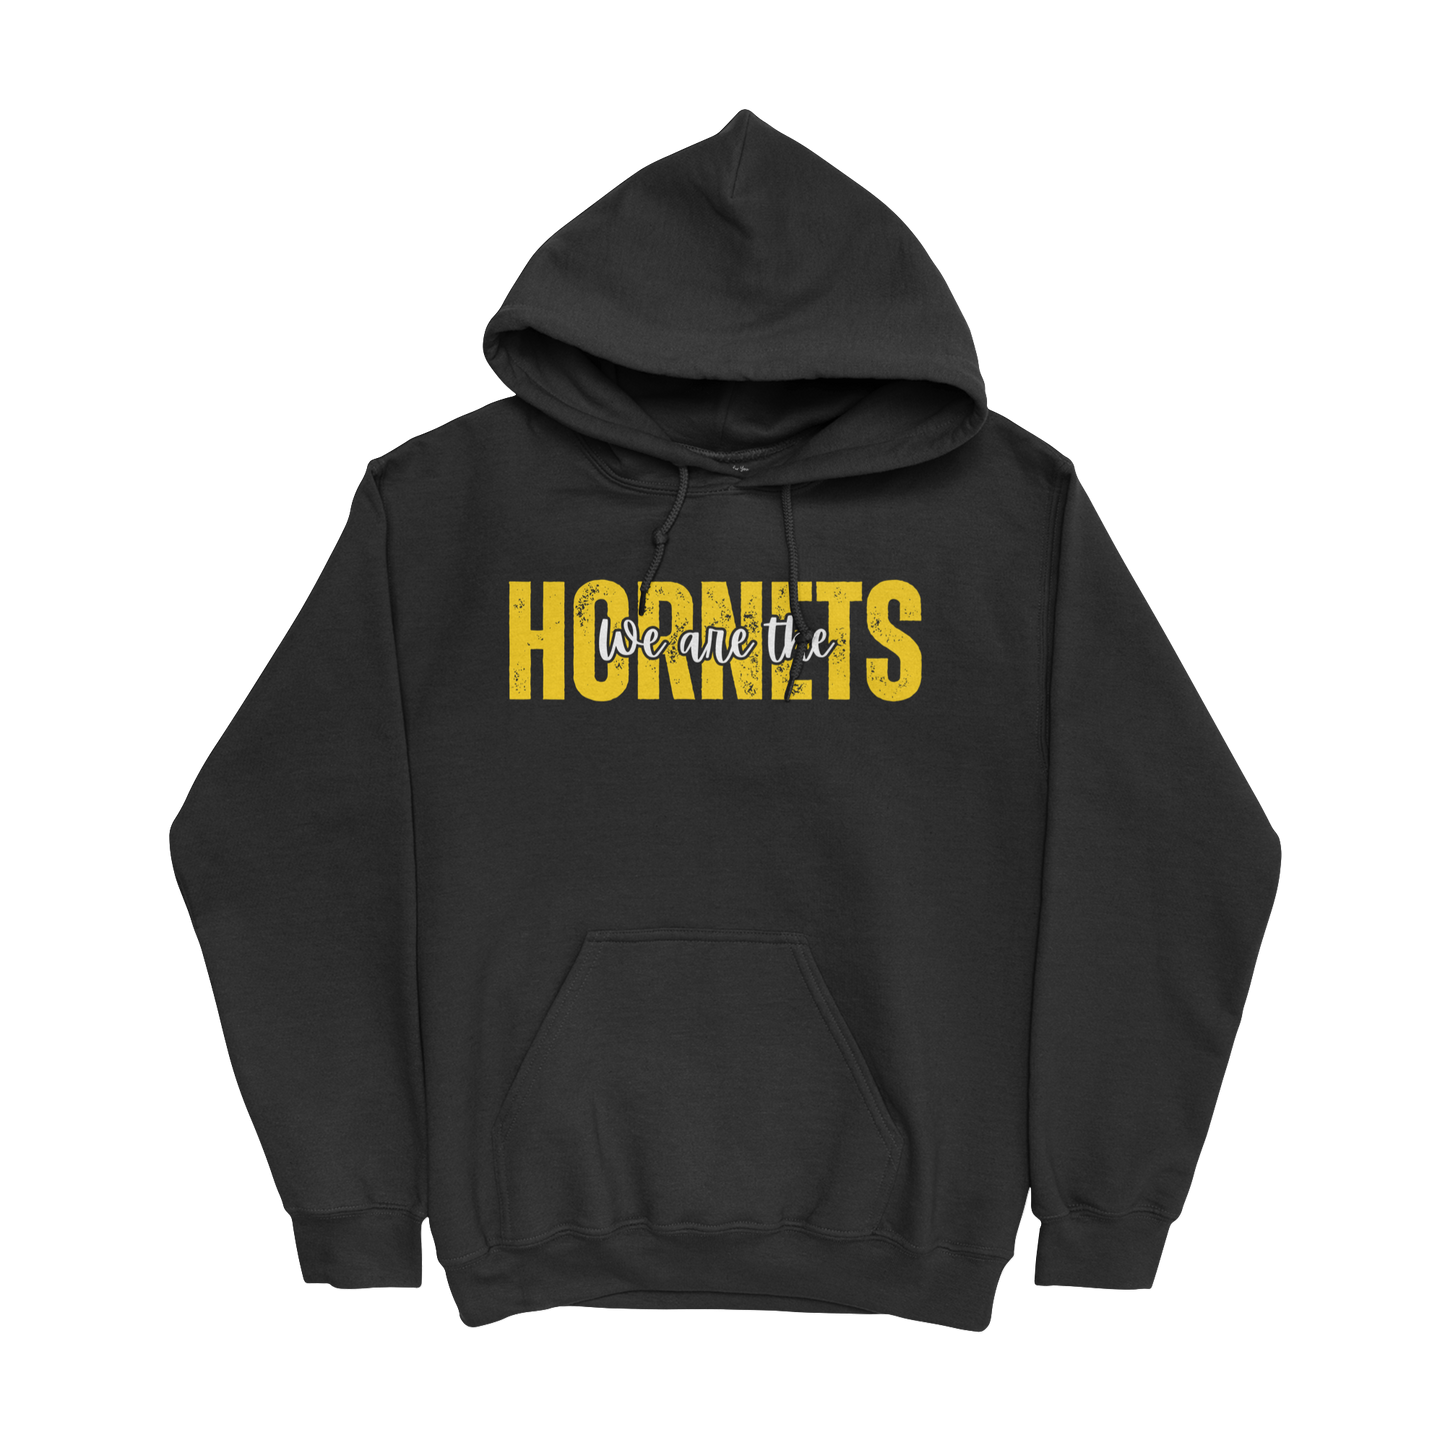 We are the Hornets Hoodie